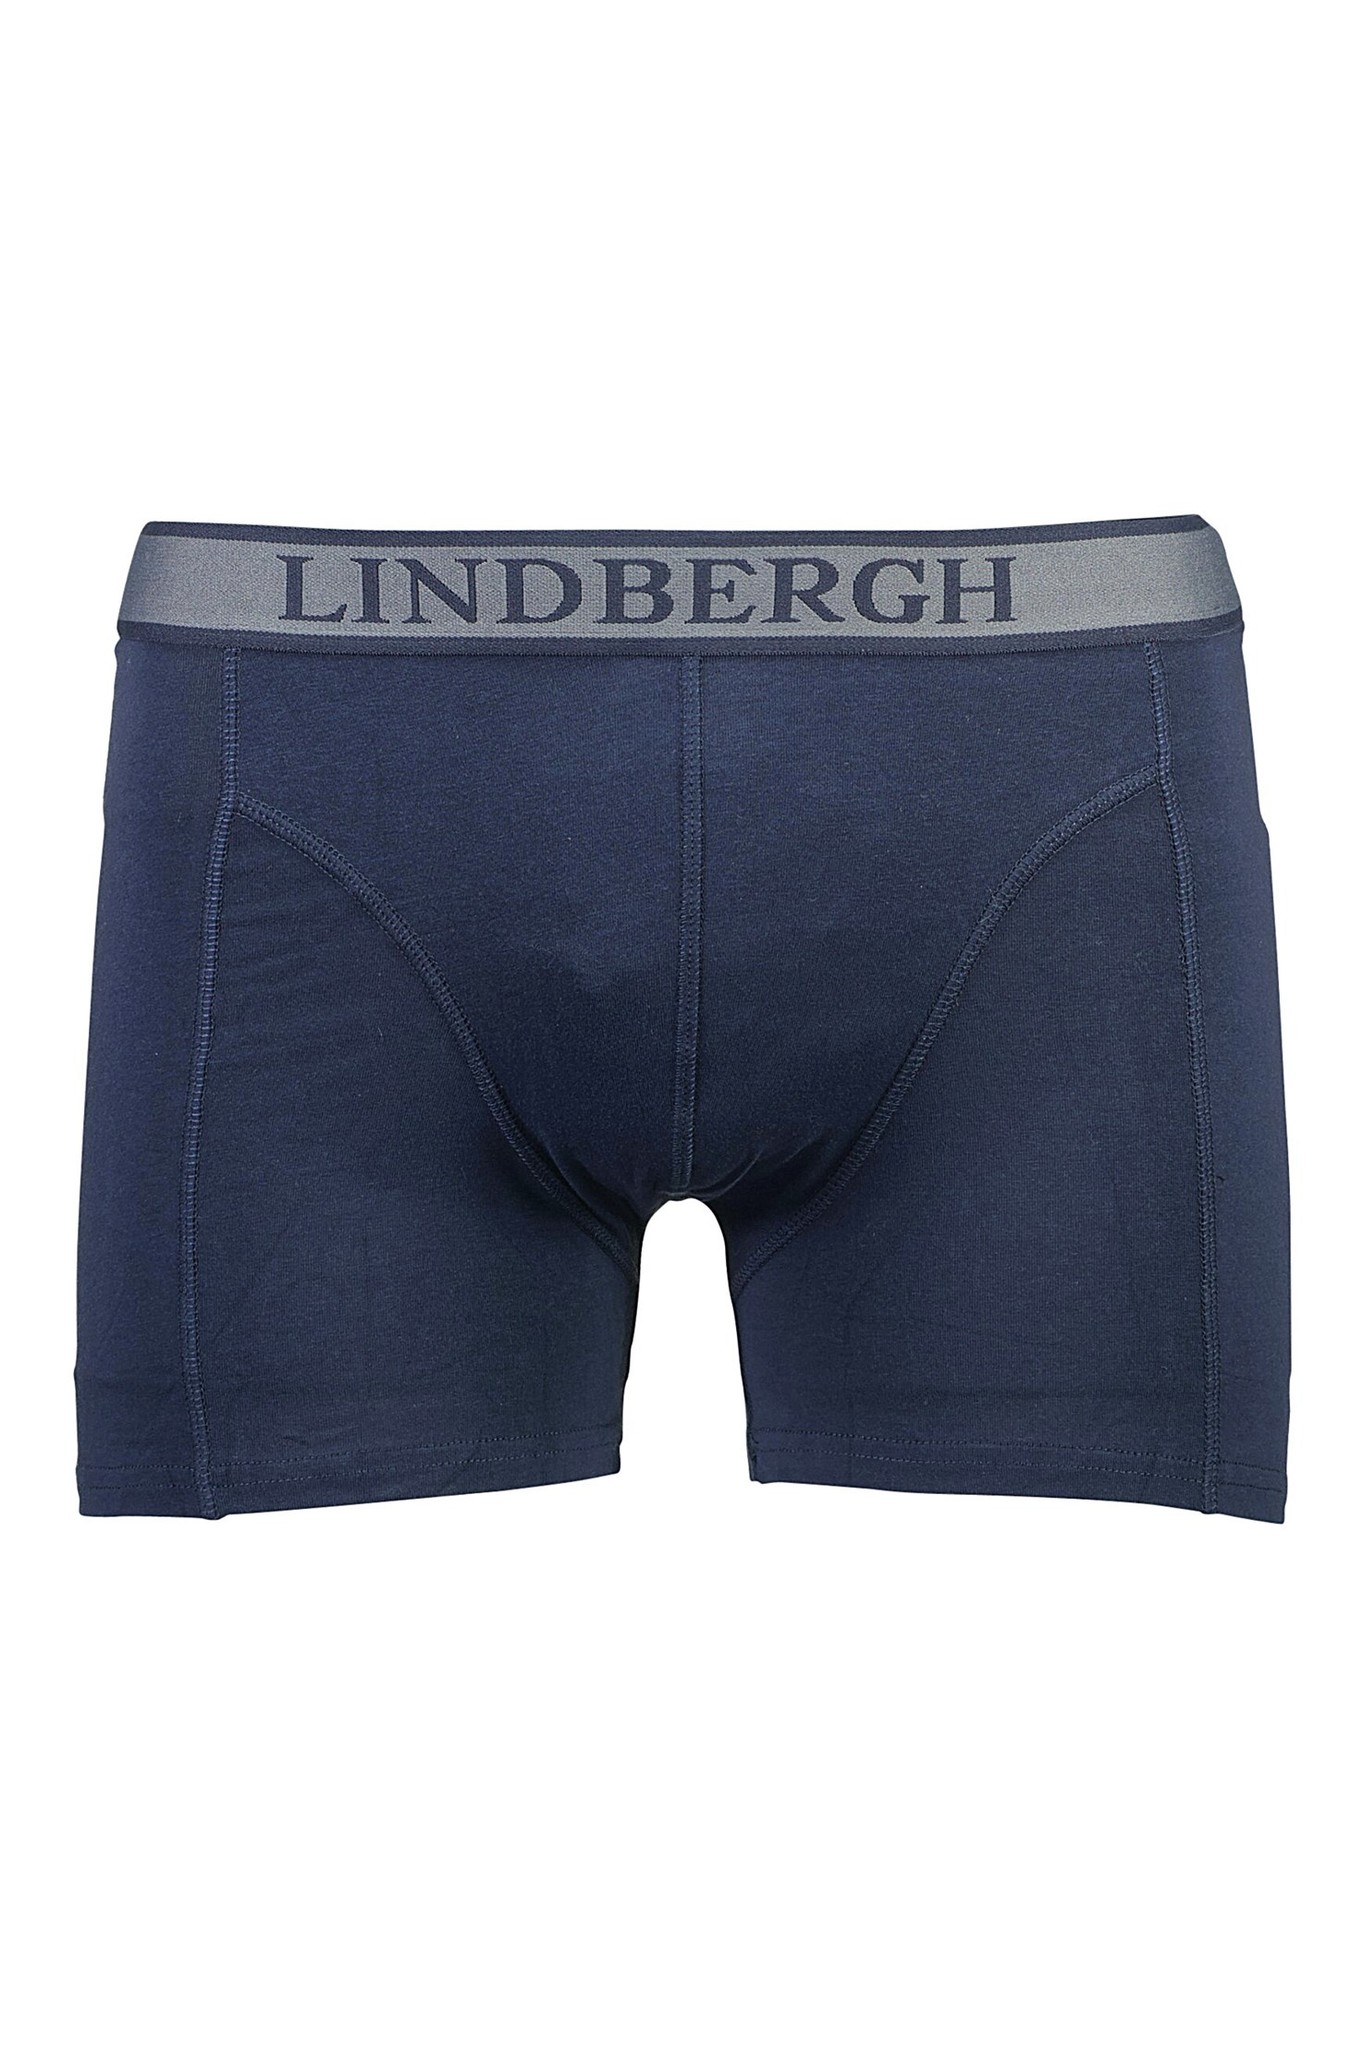 3-PACK OF BASIC BOXERS - Navy blue